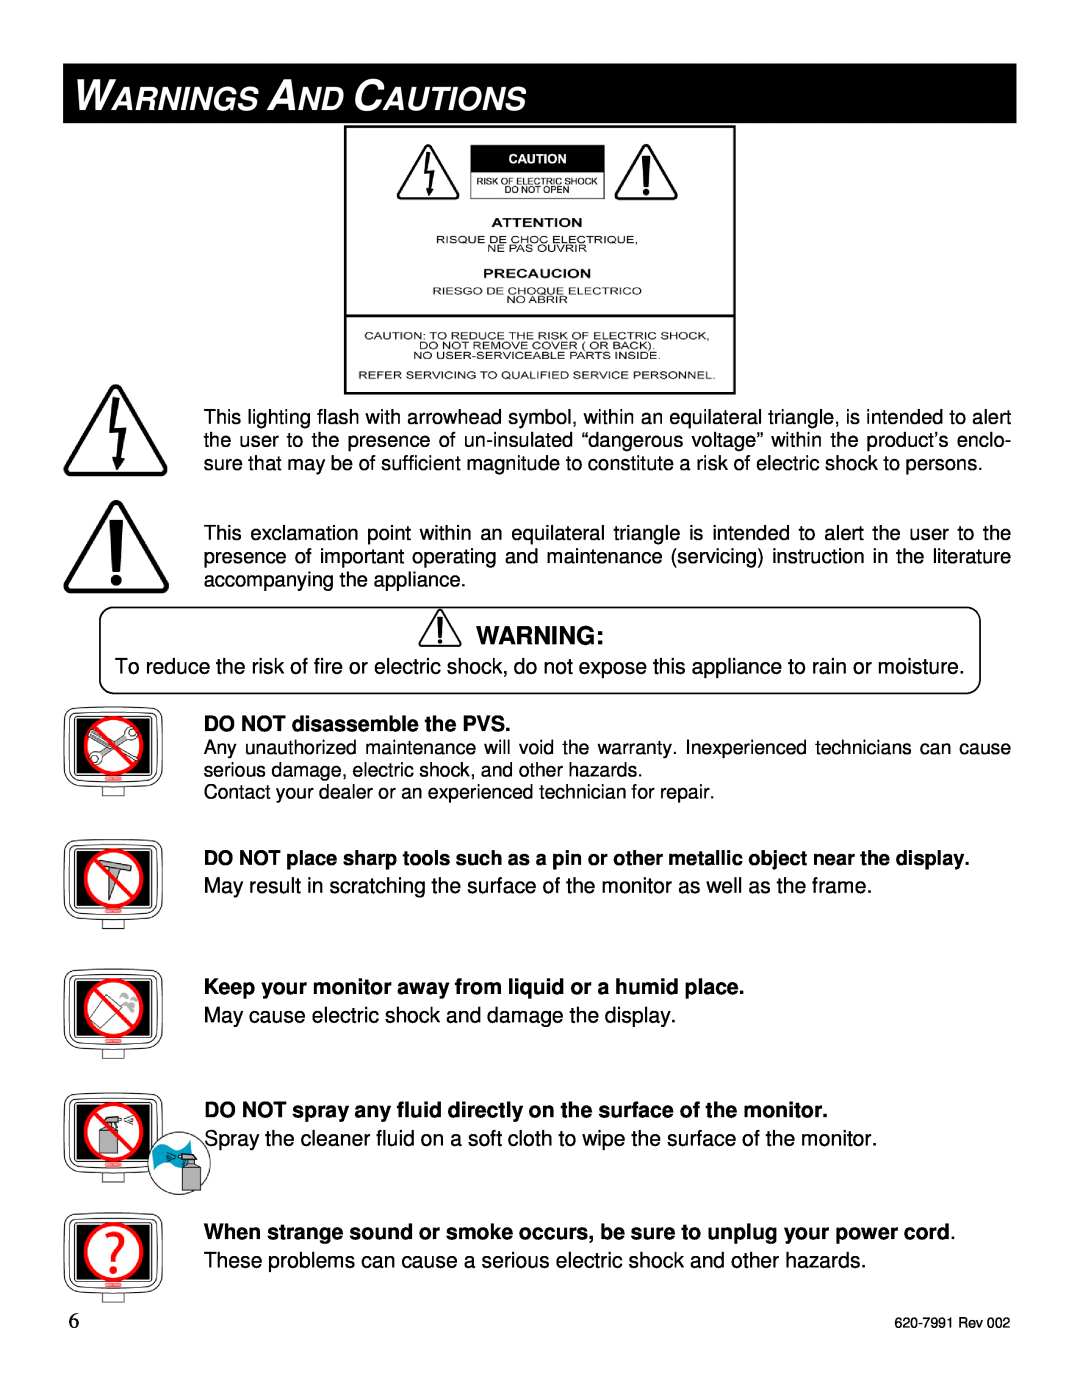 Star Trac E-TBTi Warnings And Cautions, DO NOT disassemble the PVS, Keep your monitor away from liquid or a humid place 